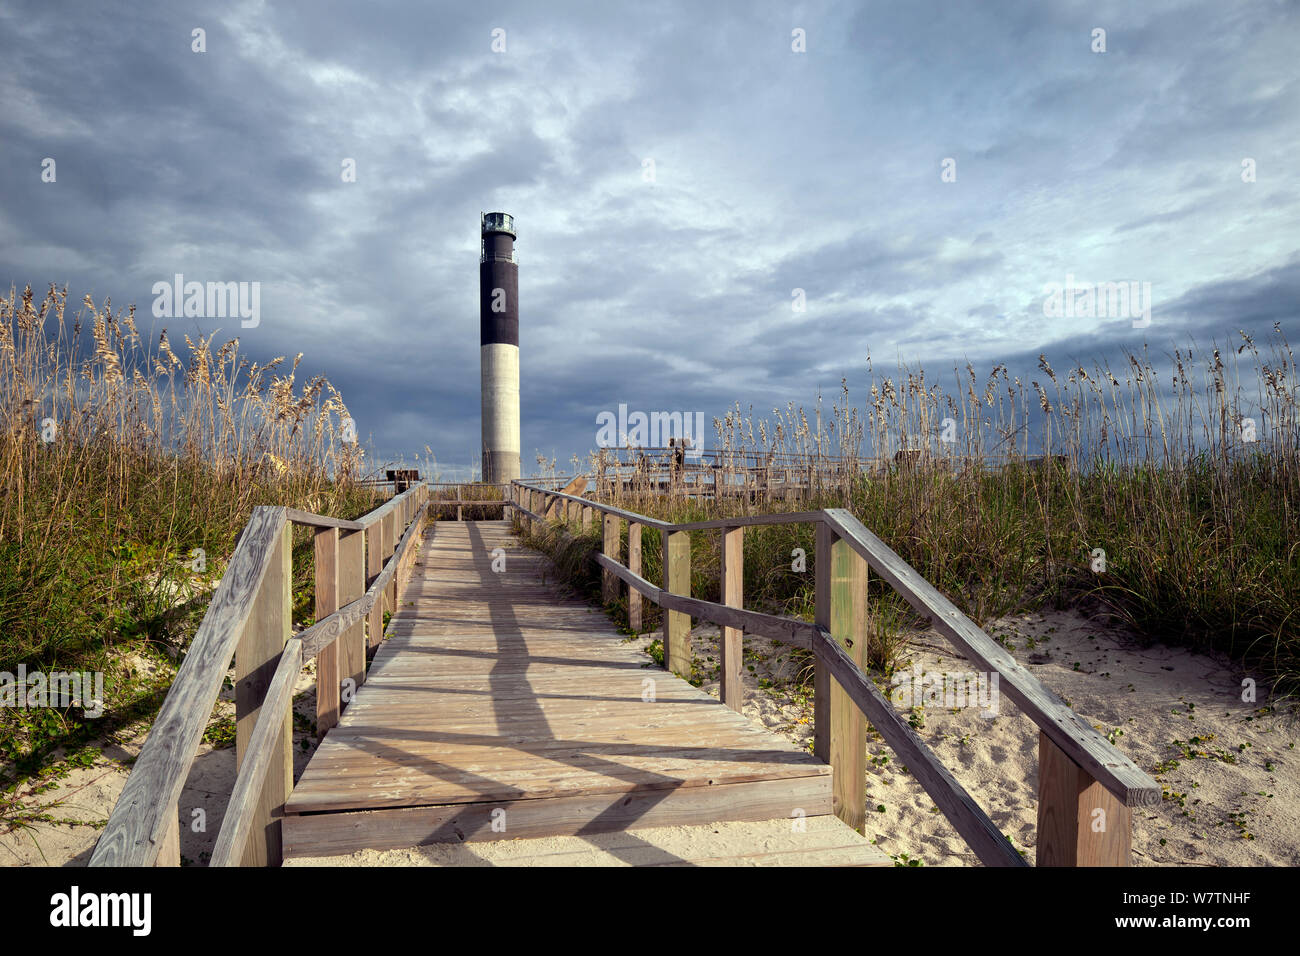 Oak Island Lighthouse at Caswell Beach near the mouth of the Cape Fear River. North Carolina, USA, October 2013. Stock Photo